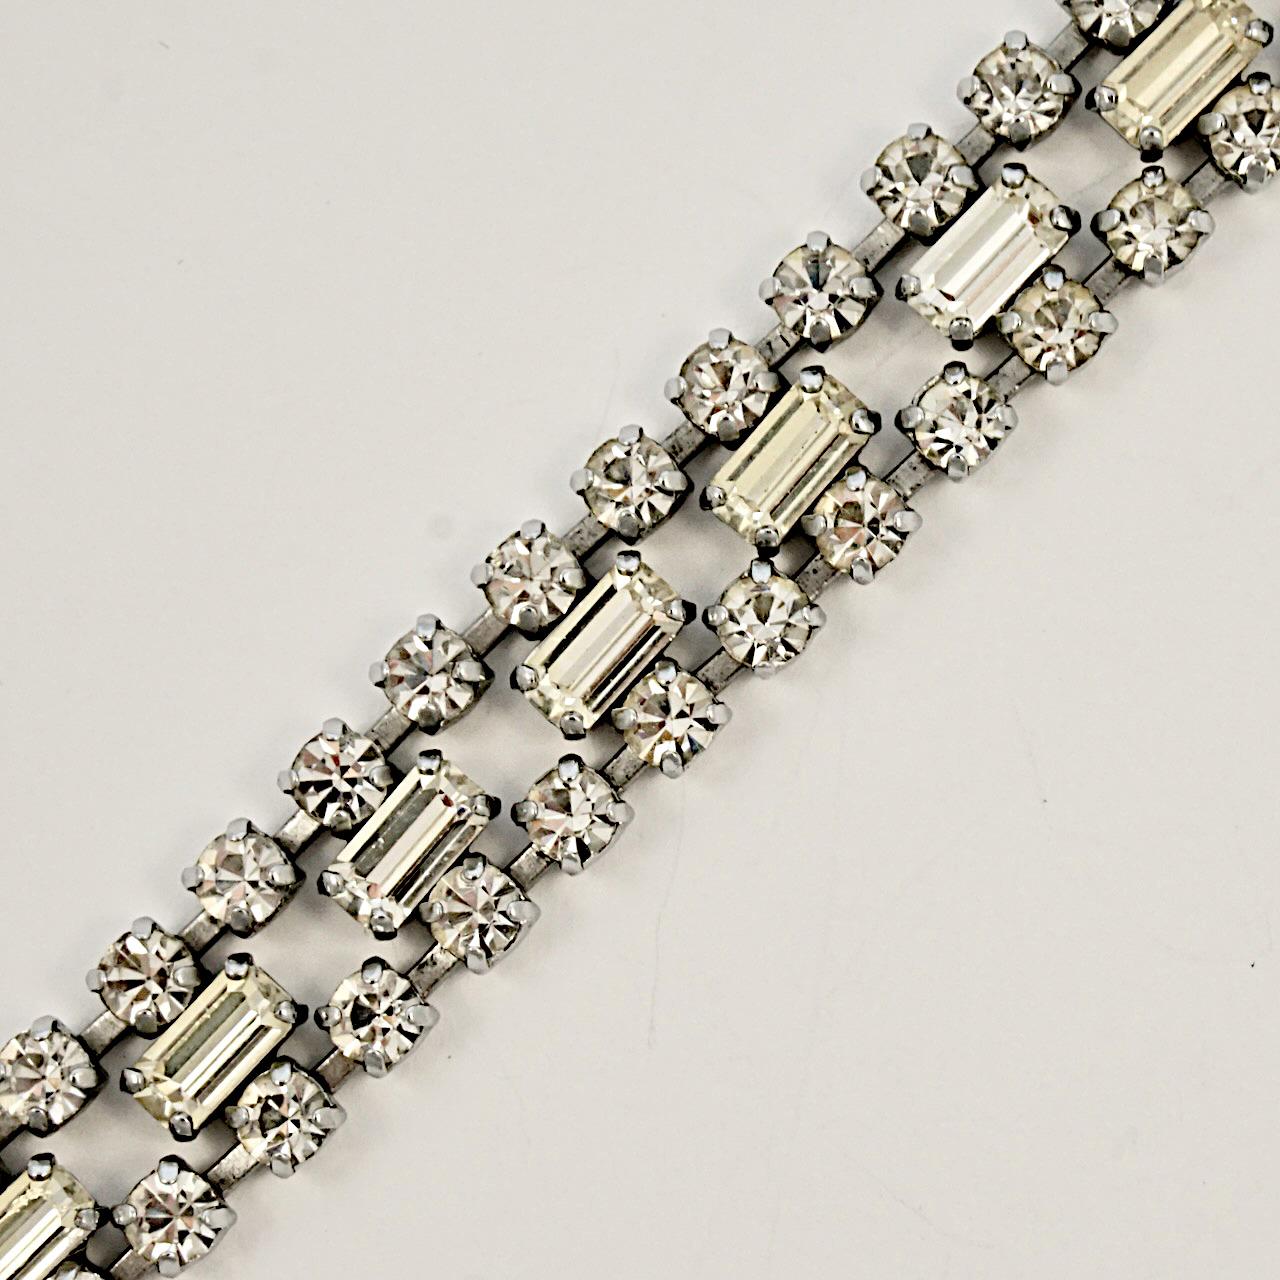 Silver Tone and Rhinestones Bracelet circa 1950s In Good Condition For Sale In London, GB